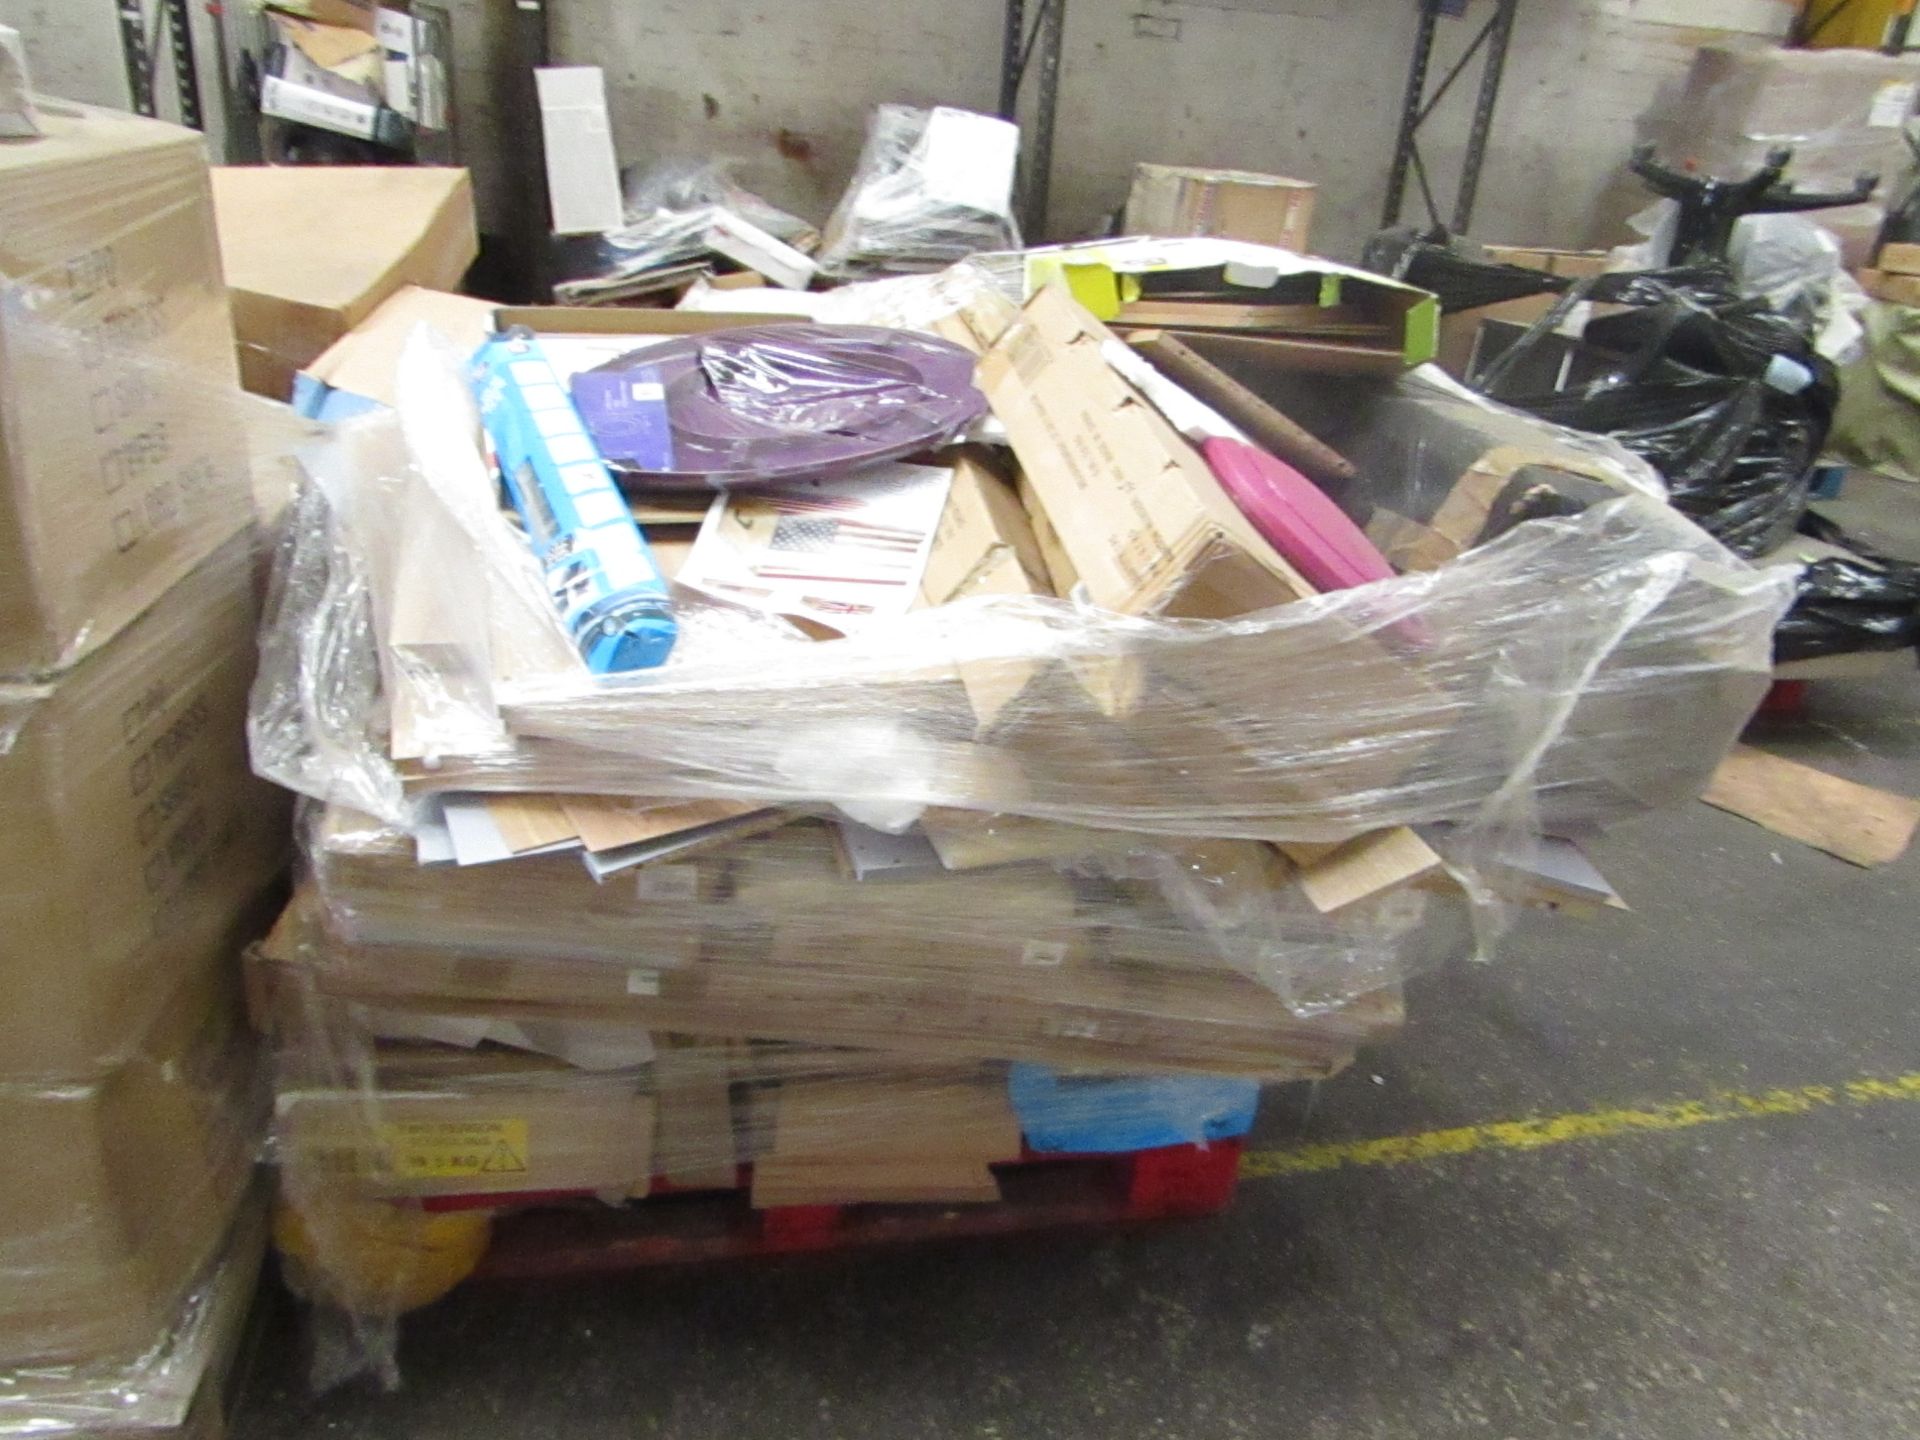 Pallet of Flat pack Furniture, some loose and some still boxed, most looks to be shelving units